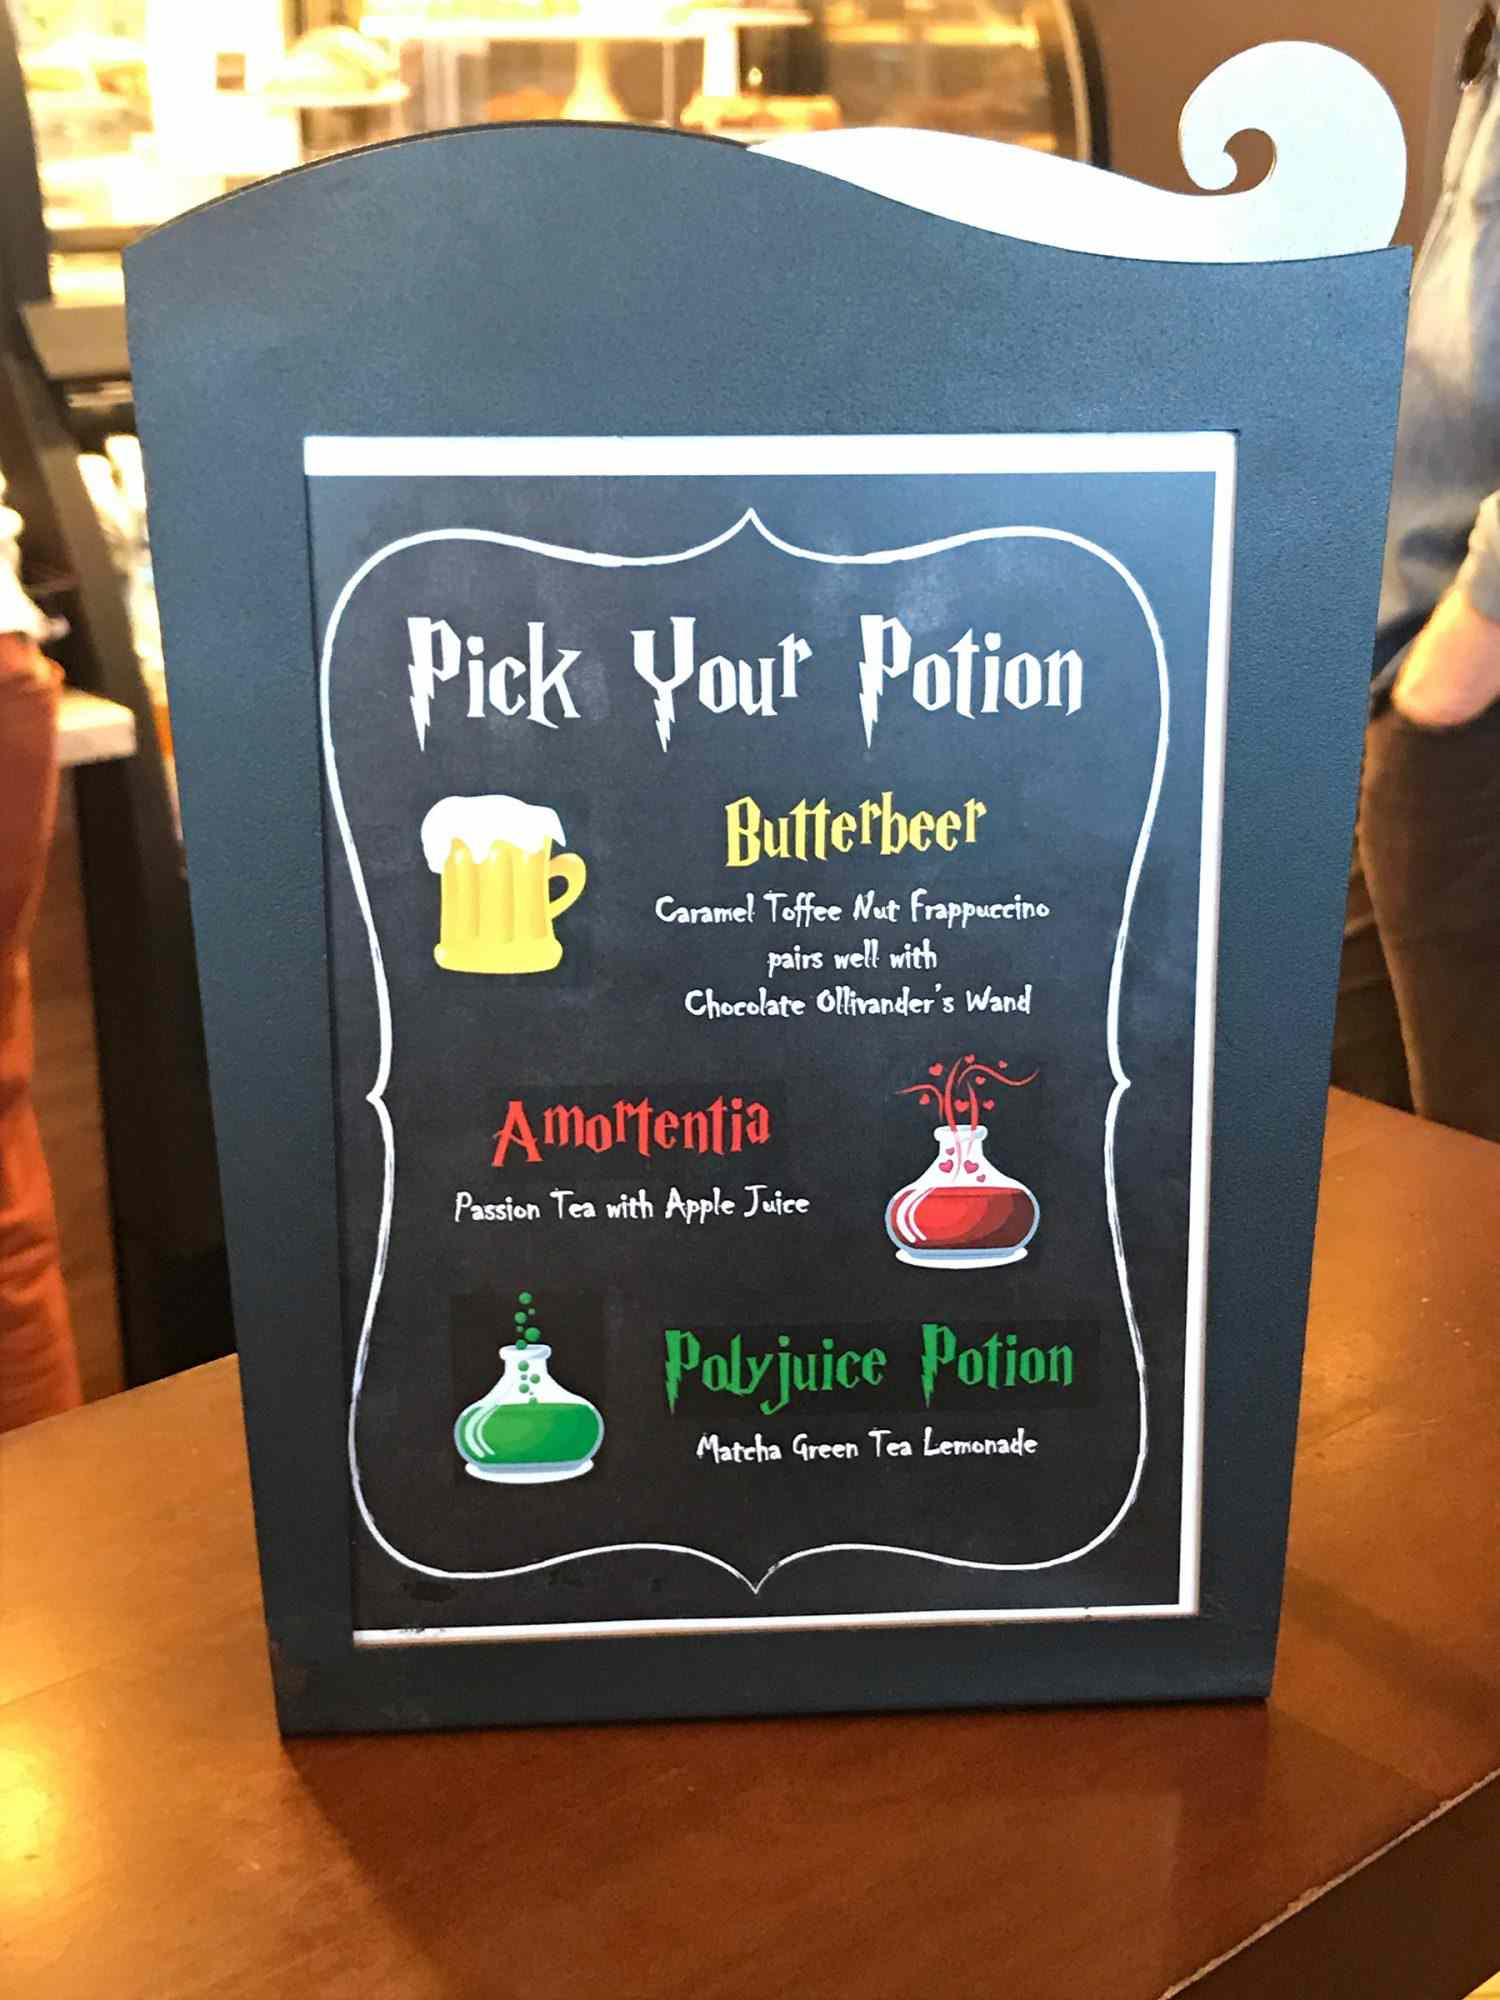 Pick your potion